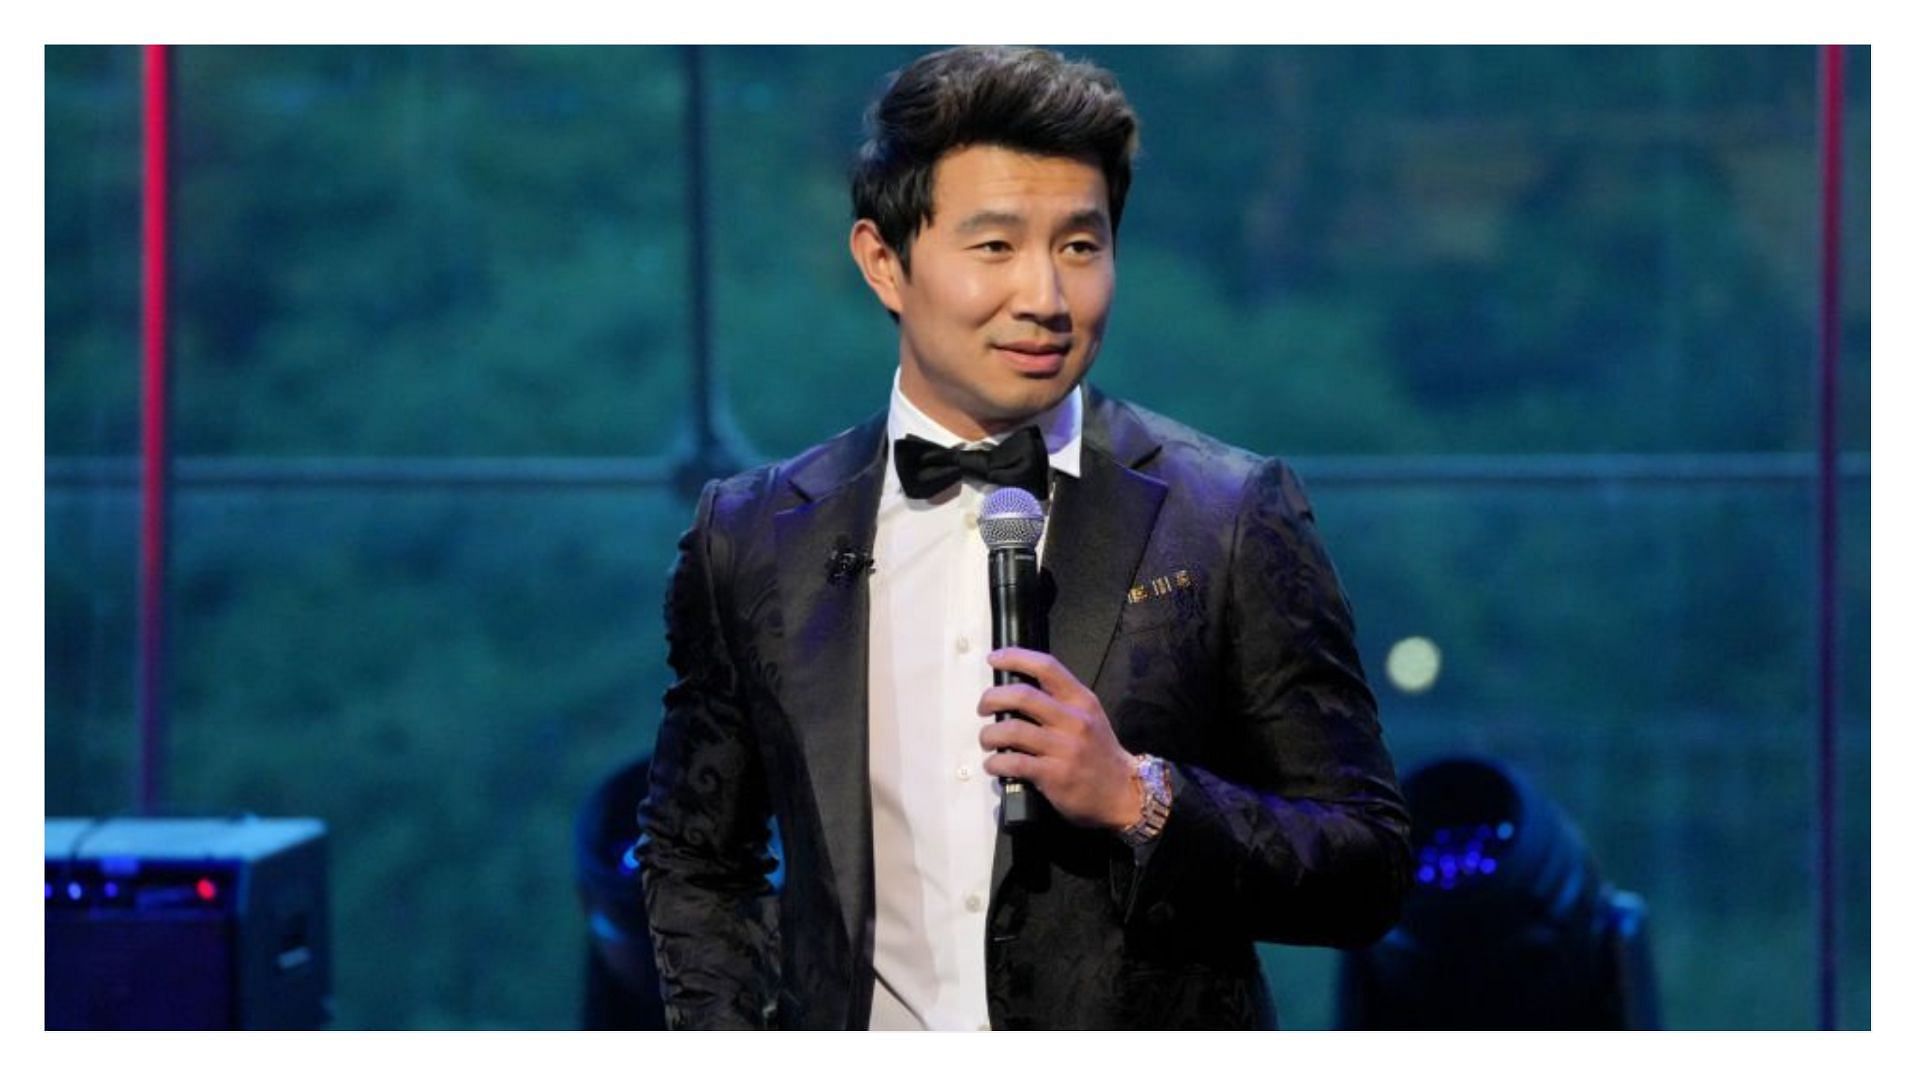 Simu Liu has not disclosed much about his personal life (Image via Kevin Mazur/Getty Images)